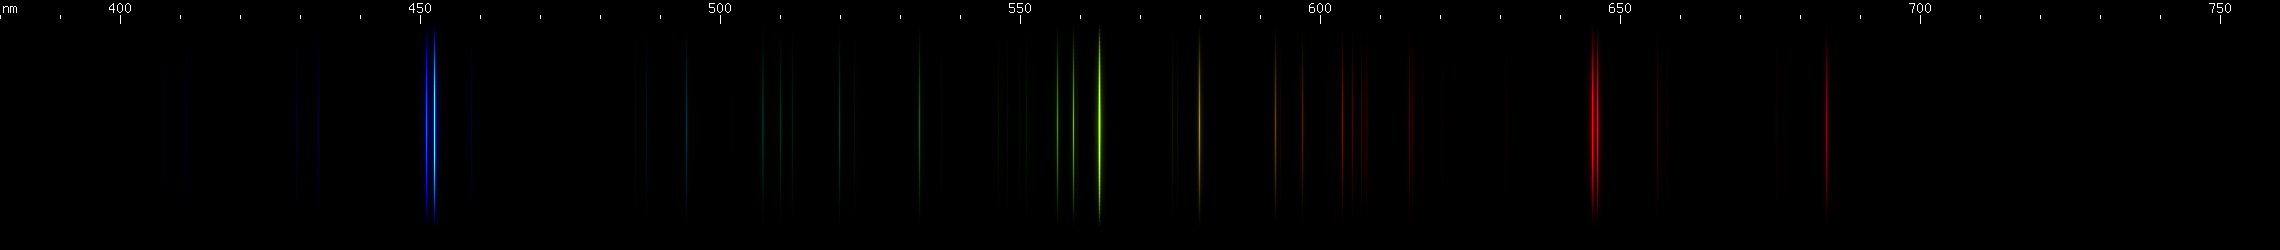 Spectral Lines of Tin